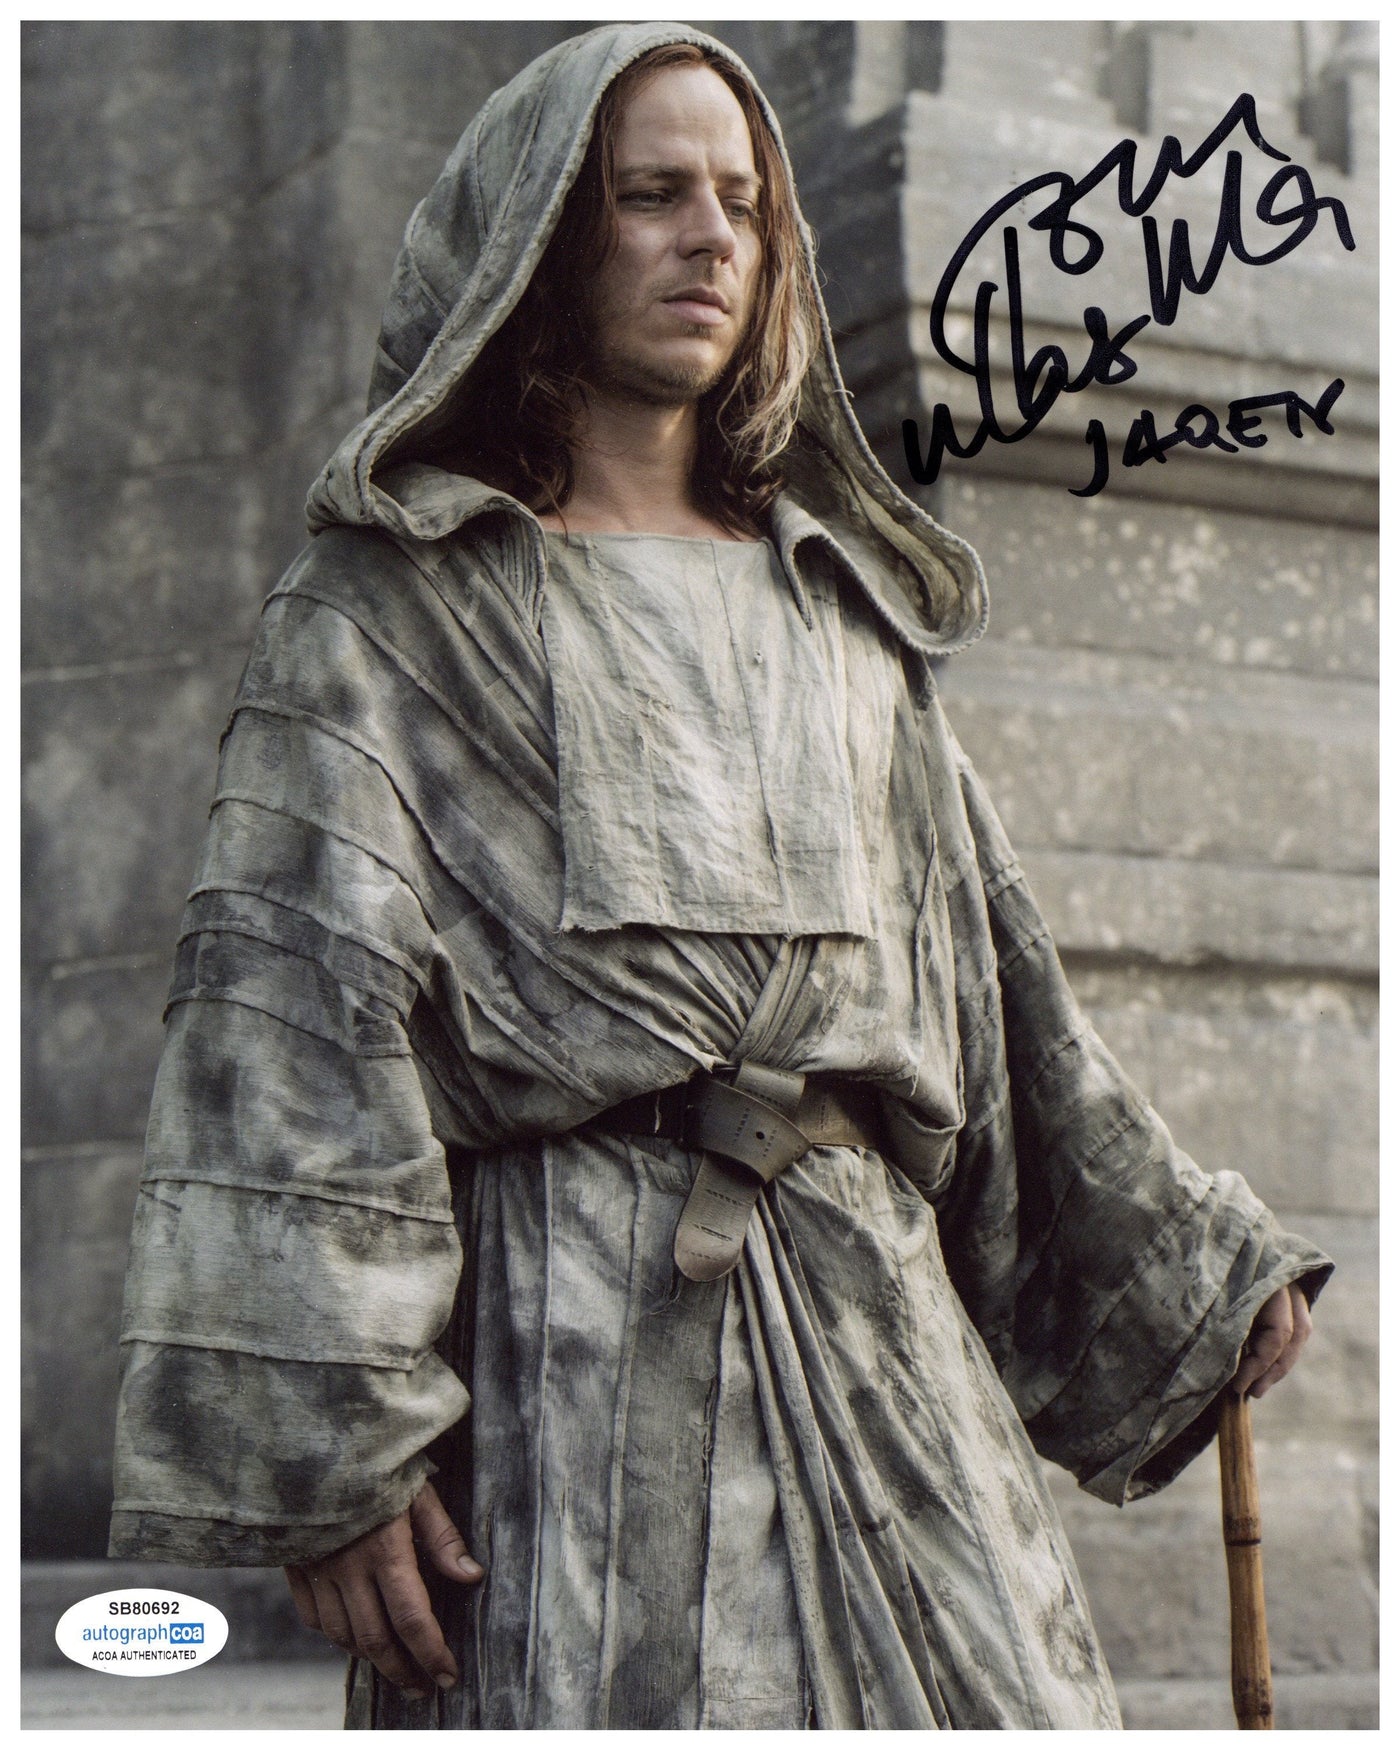 Tom Wlaschiha Signed 8x10 Photo Game of Thrones Autographed ACOA